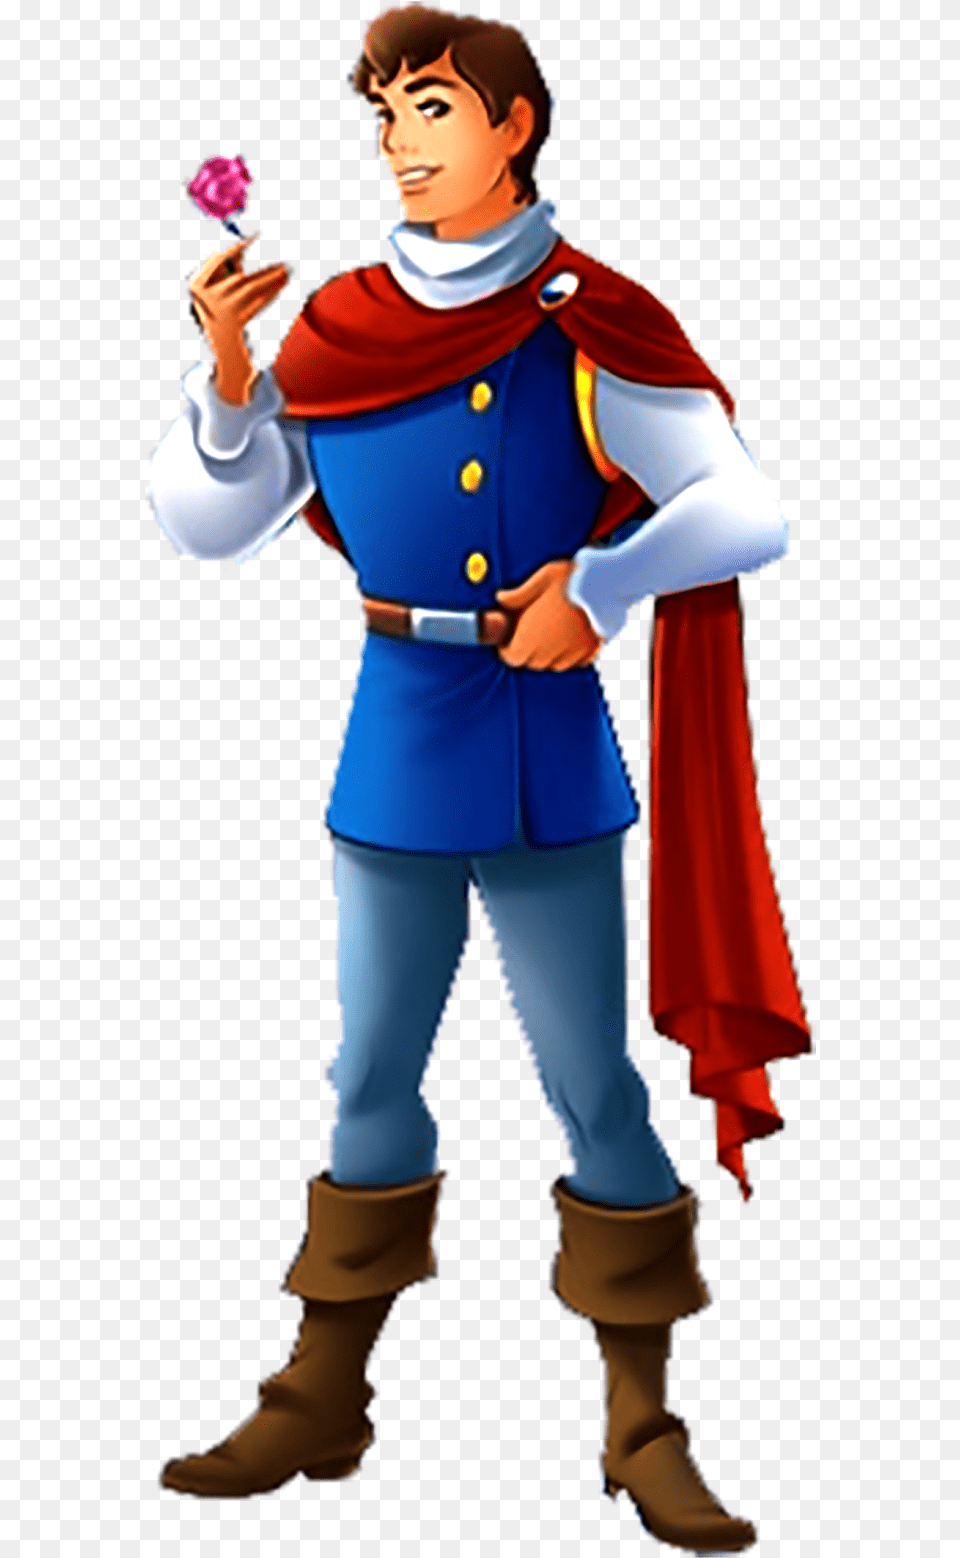 Prince Charming Snow White And The Seven Dwarfs Disney Prince Charming Snow White, Cape, Clothing, Costume, Person Png Image